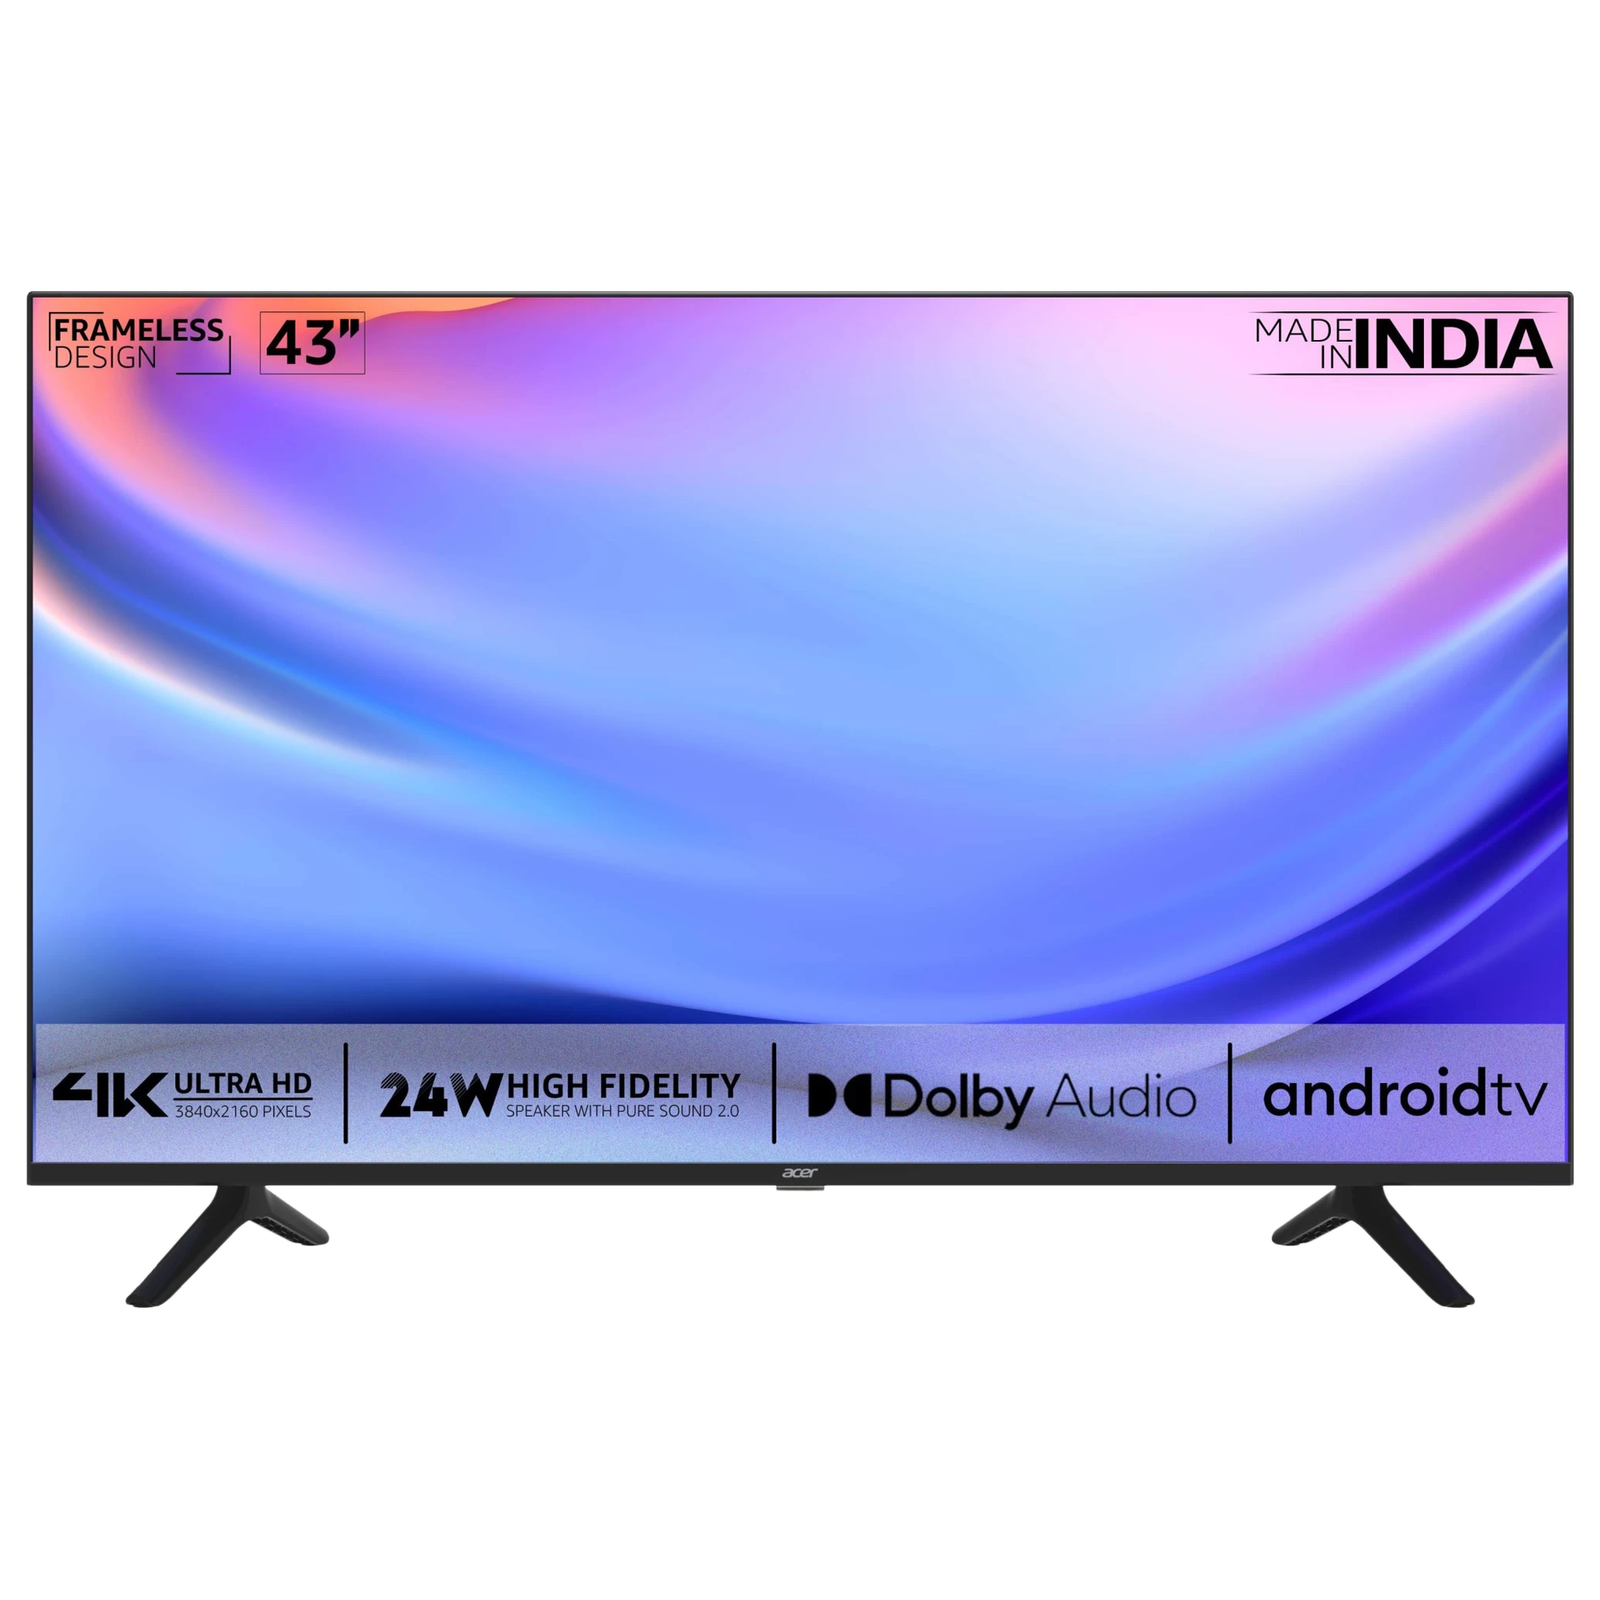 Top 10 LED TV Brands In India